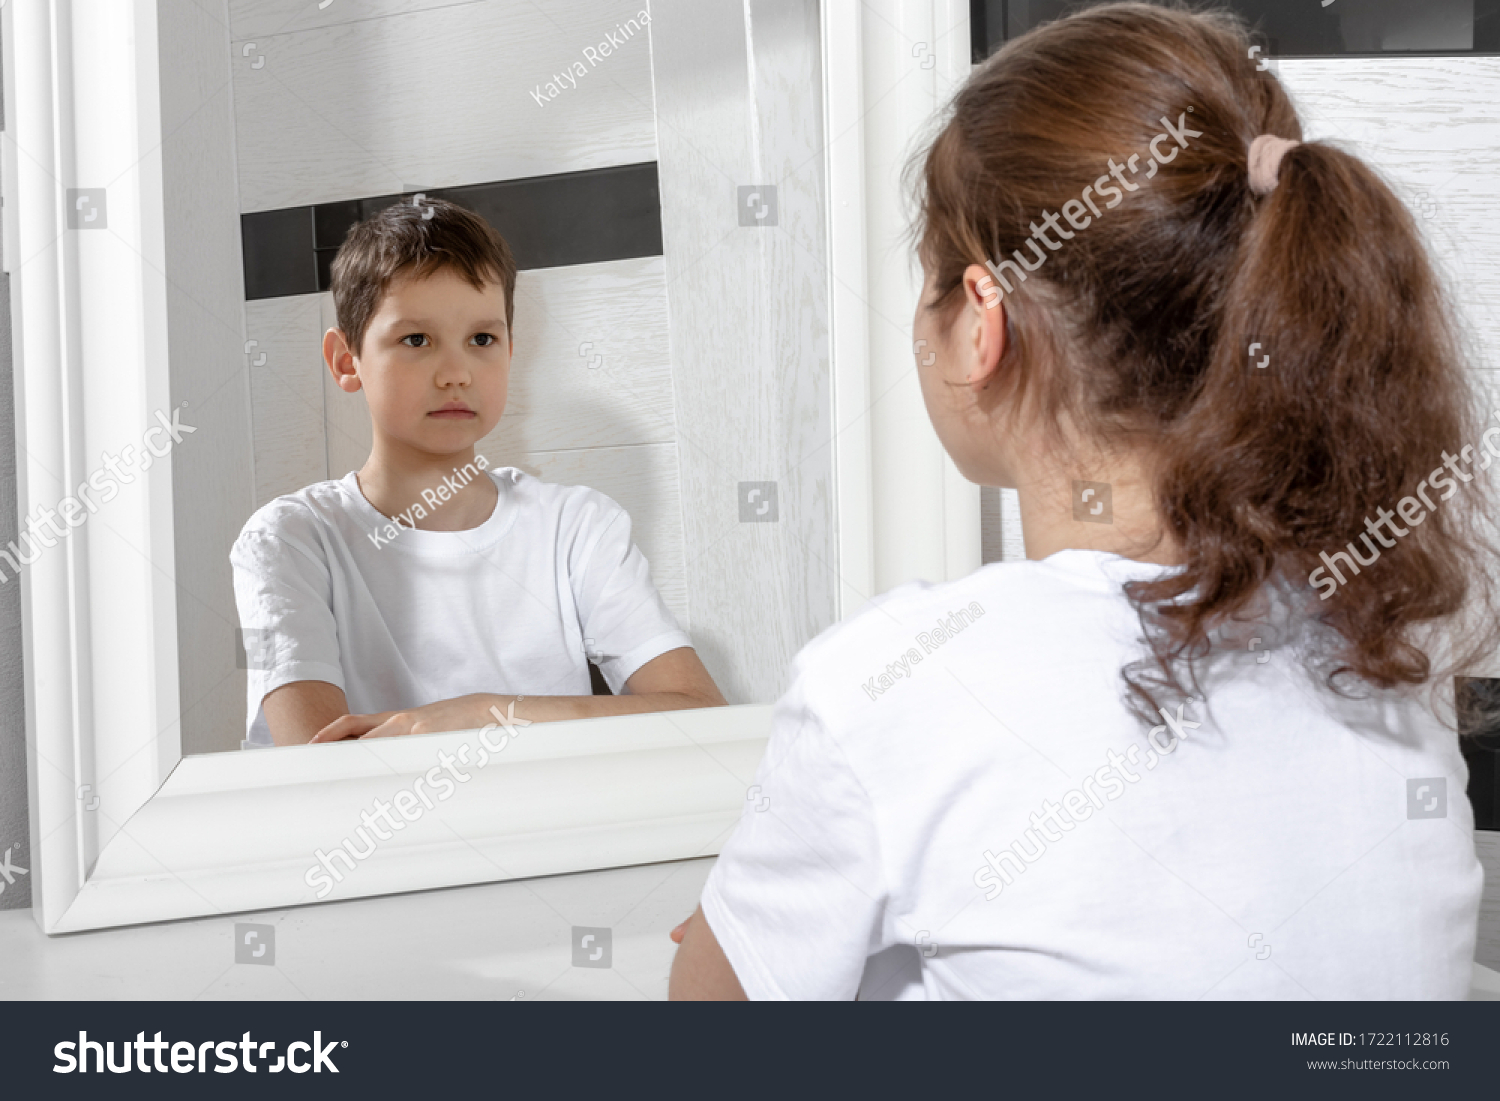 Reflection Girl Mirror By Boy Sister Stock Photo Shutterstock